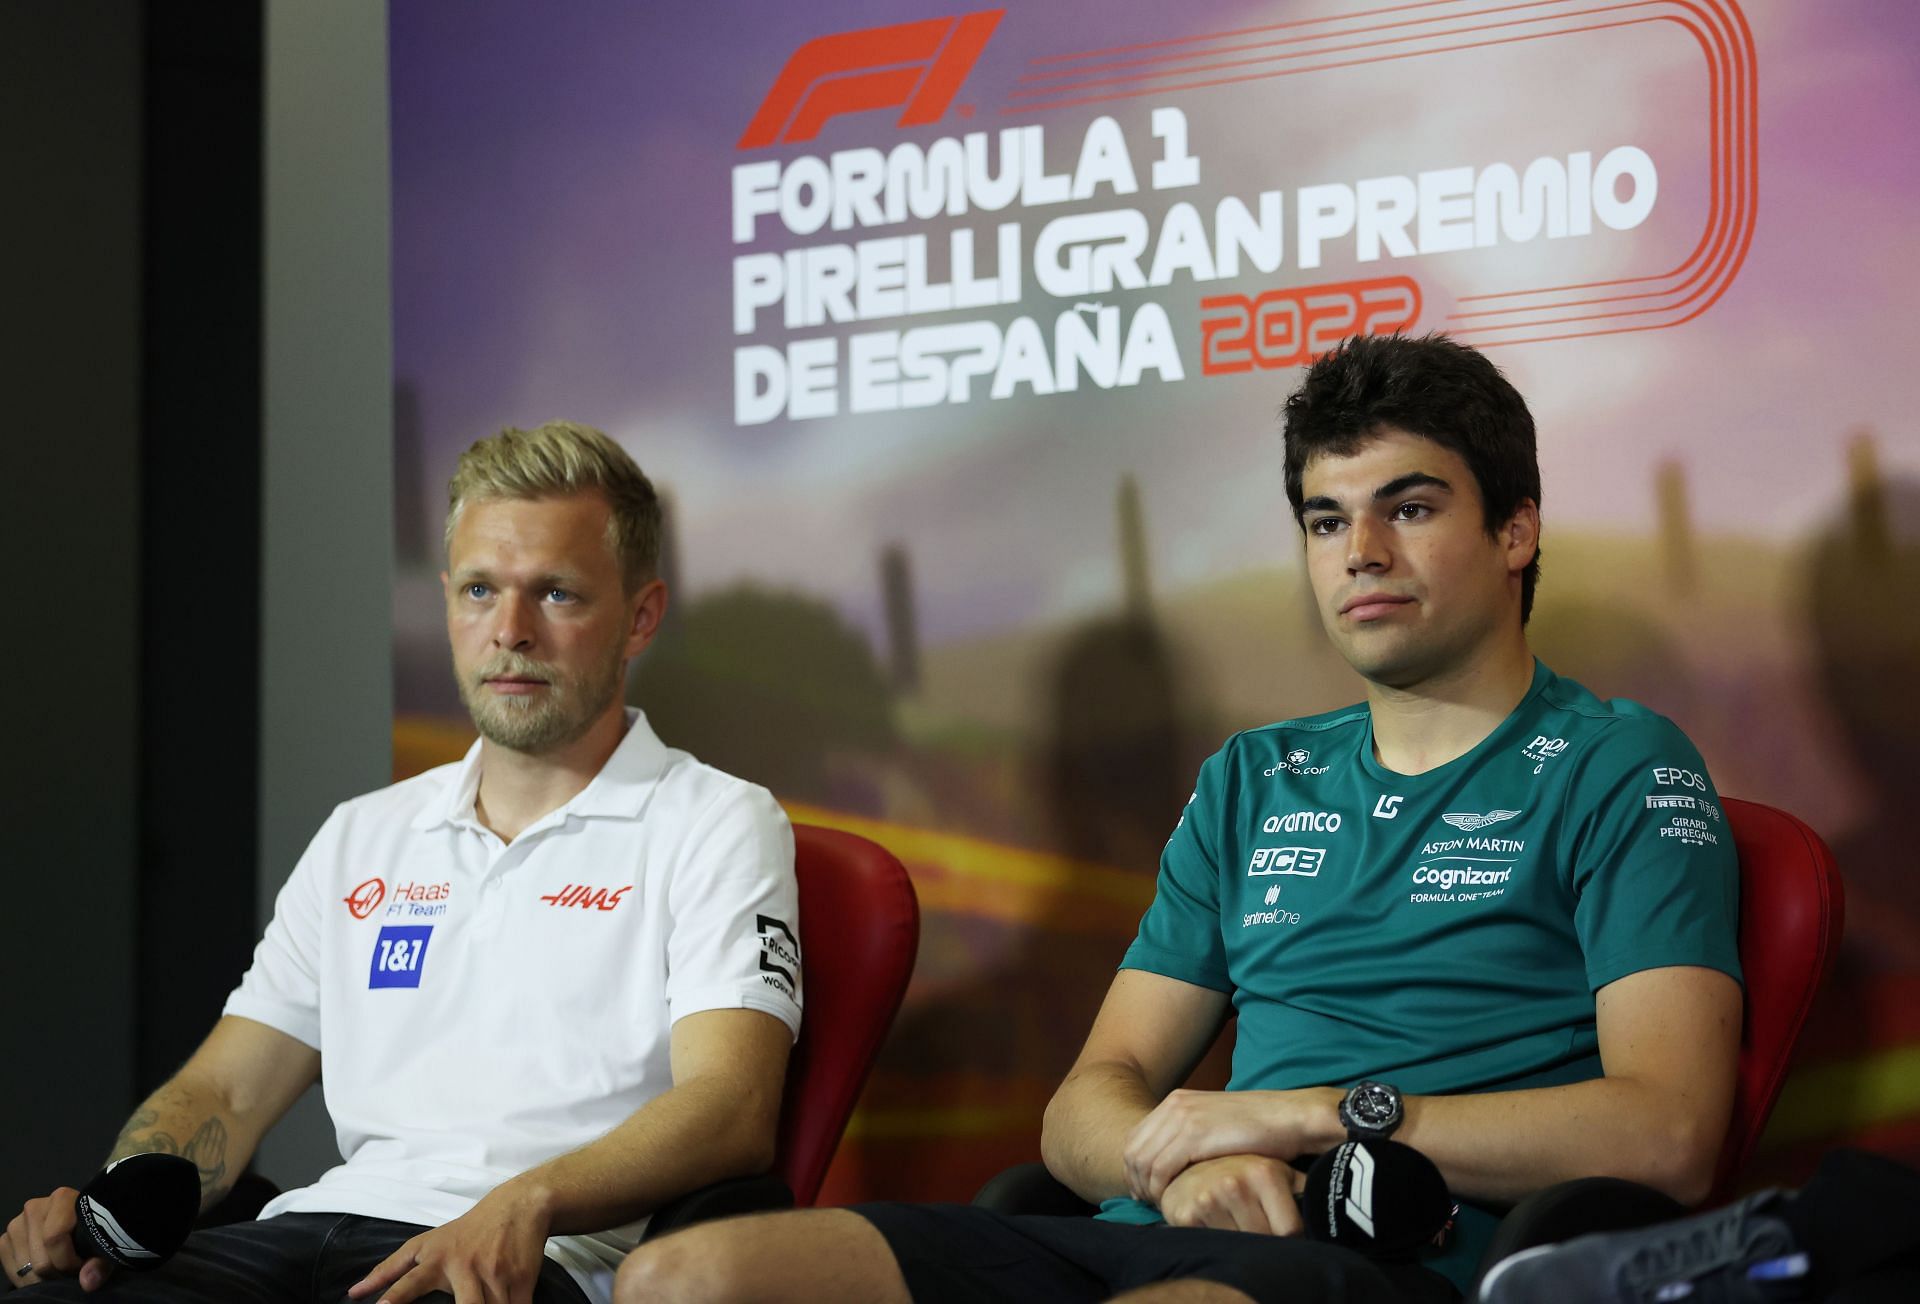 Haas F1 driver Kevin Magnussen (left) and Aston Martin F1 driver Lance Stroll (right) during the 2022 F1 Spanish GP pre-race press conference (Photo by Bryn Lennon/Getty Images)